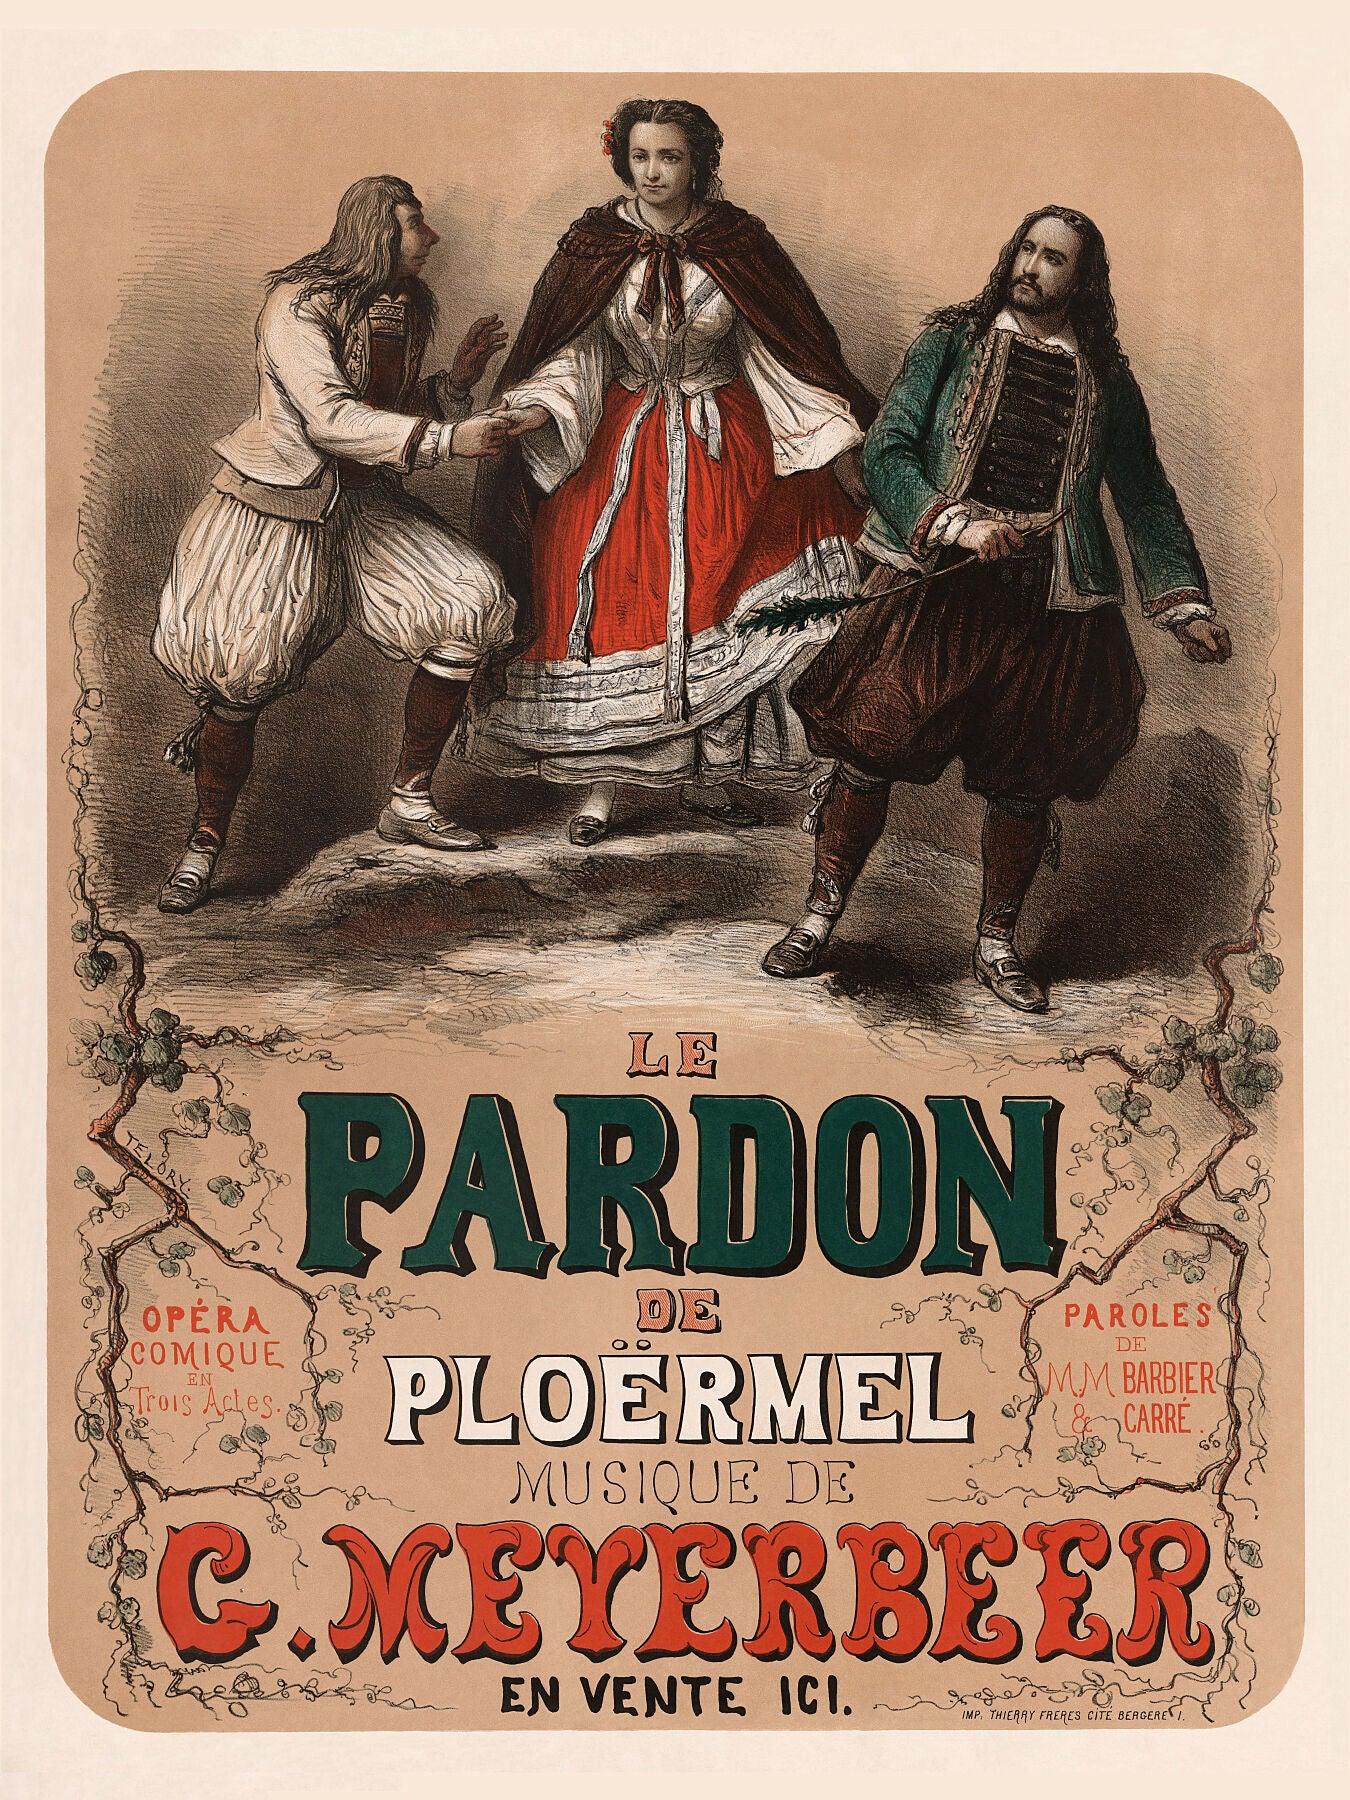 Poster for the premiere of Giacomo Meyerbeer's opera Le pardon de Ploërmel (Dinorah), presented by the Opéra-Comique in Paris on 4 April 1859. The illustration depicts the characters Corentin, Dinorah, and Hoël - Henri Télory.